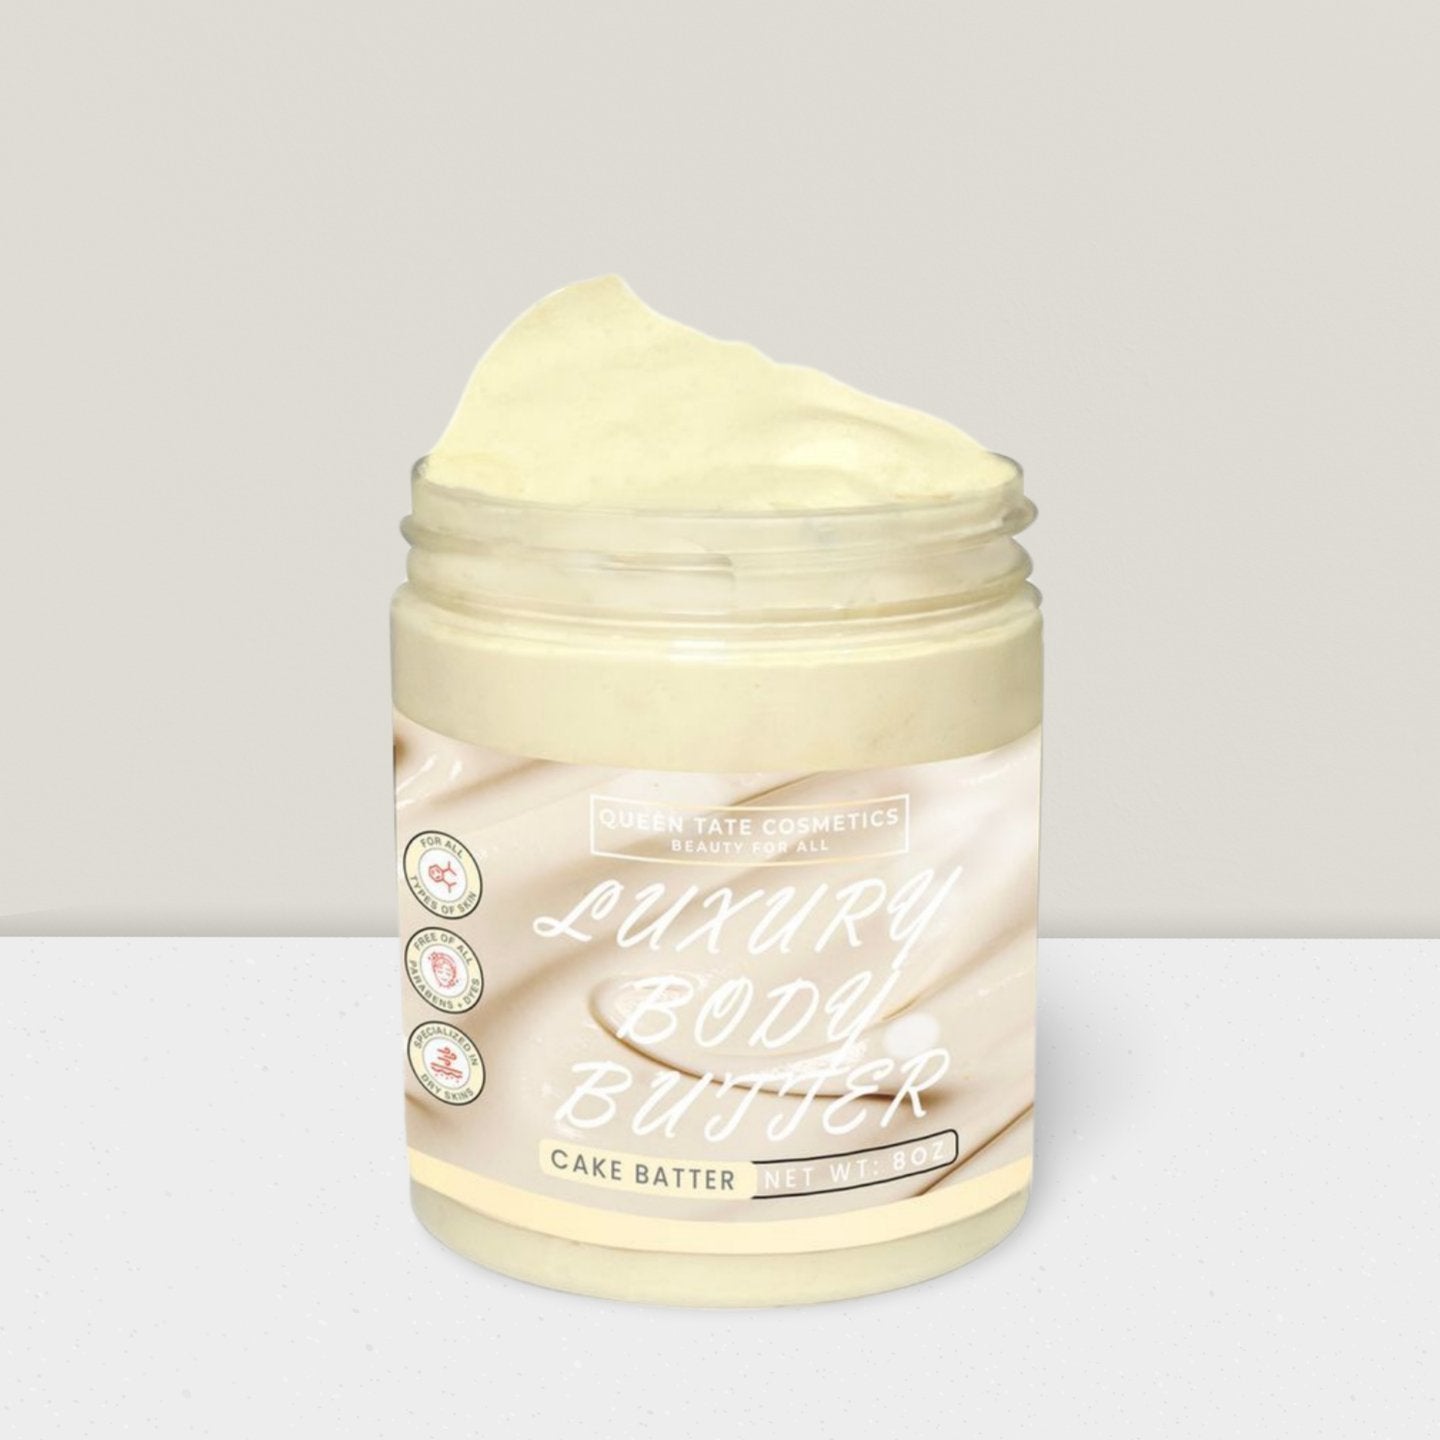 Cake Batter-Handcrafted Body Butter - Queen Tate CosmeticsHandcrafted Luxury Body ButterCake Batter-Handcrafted Body ButterHandcrafted Luxury Body ButterQueen Tate Cosmetics 8oz